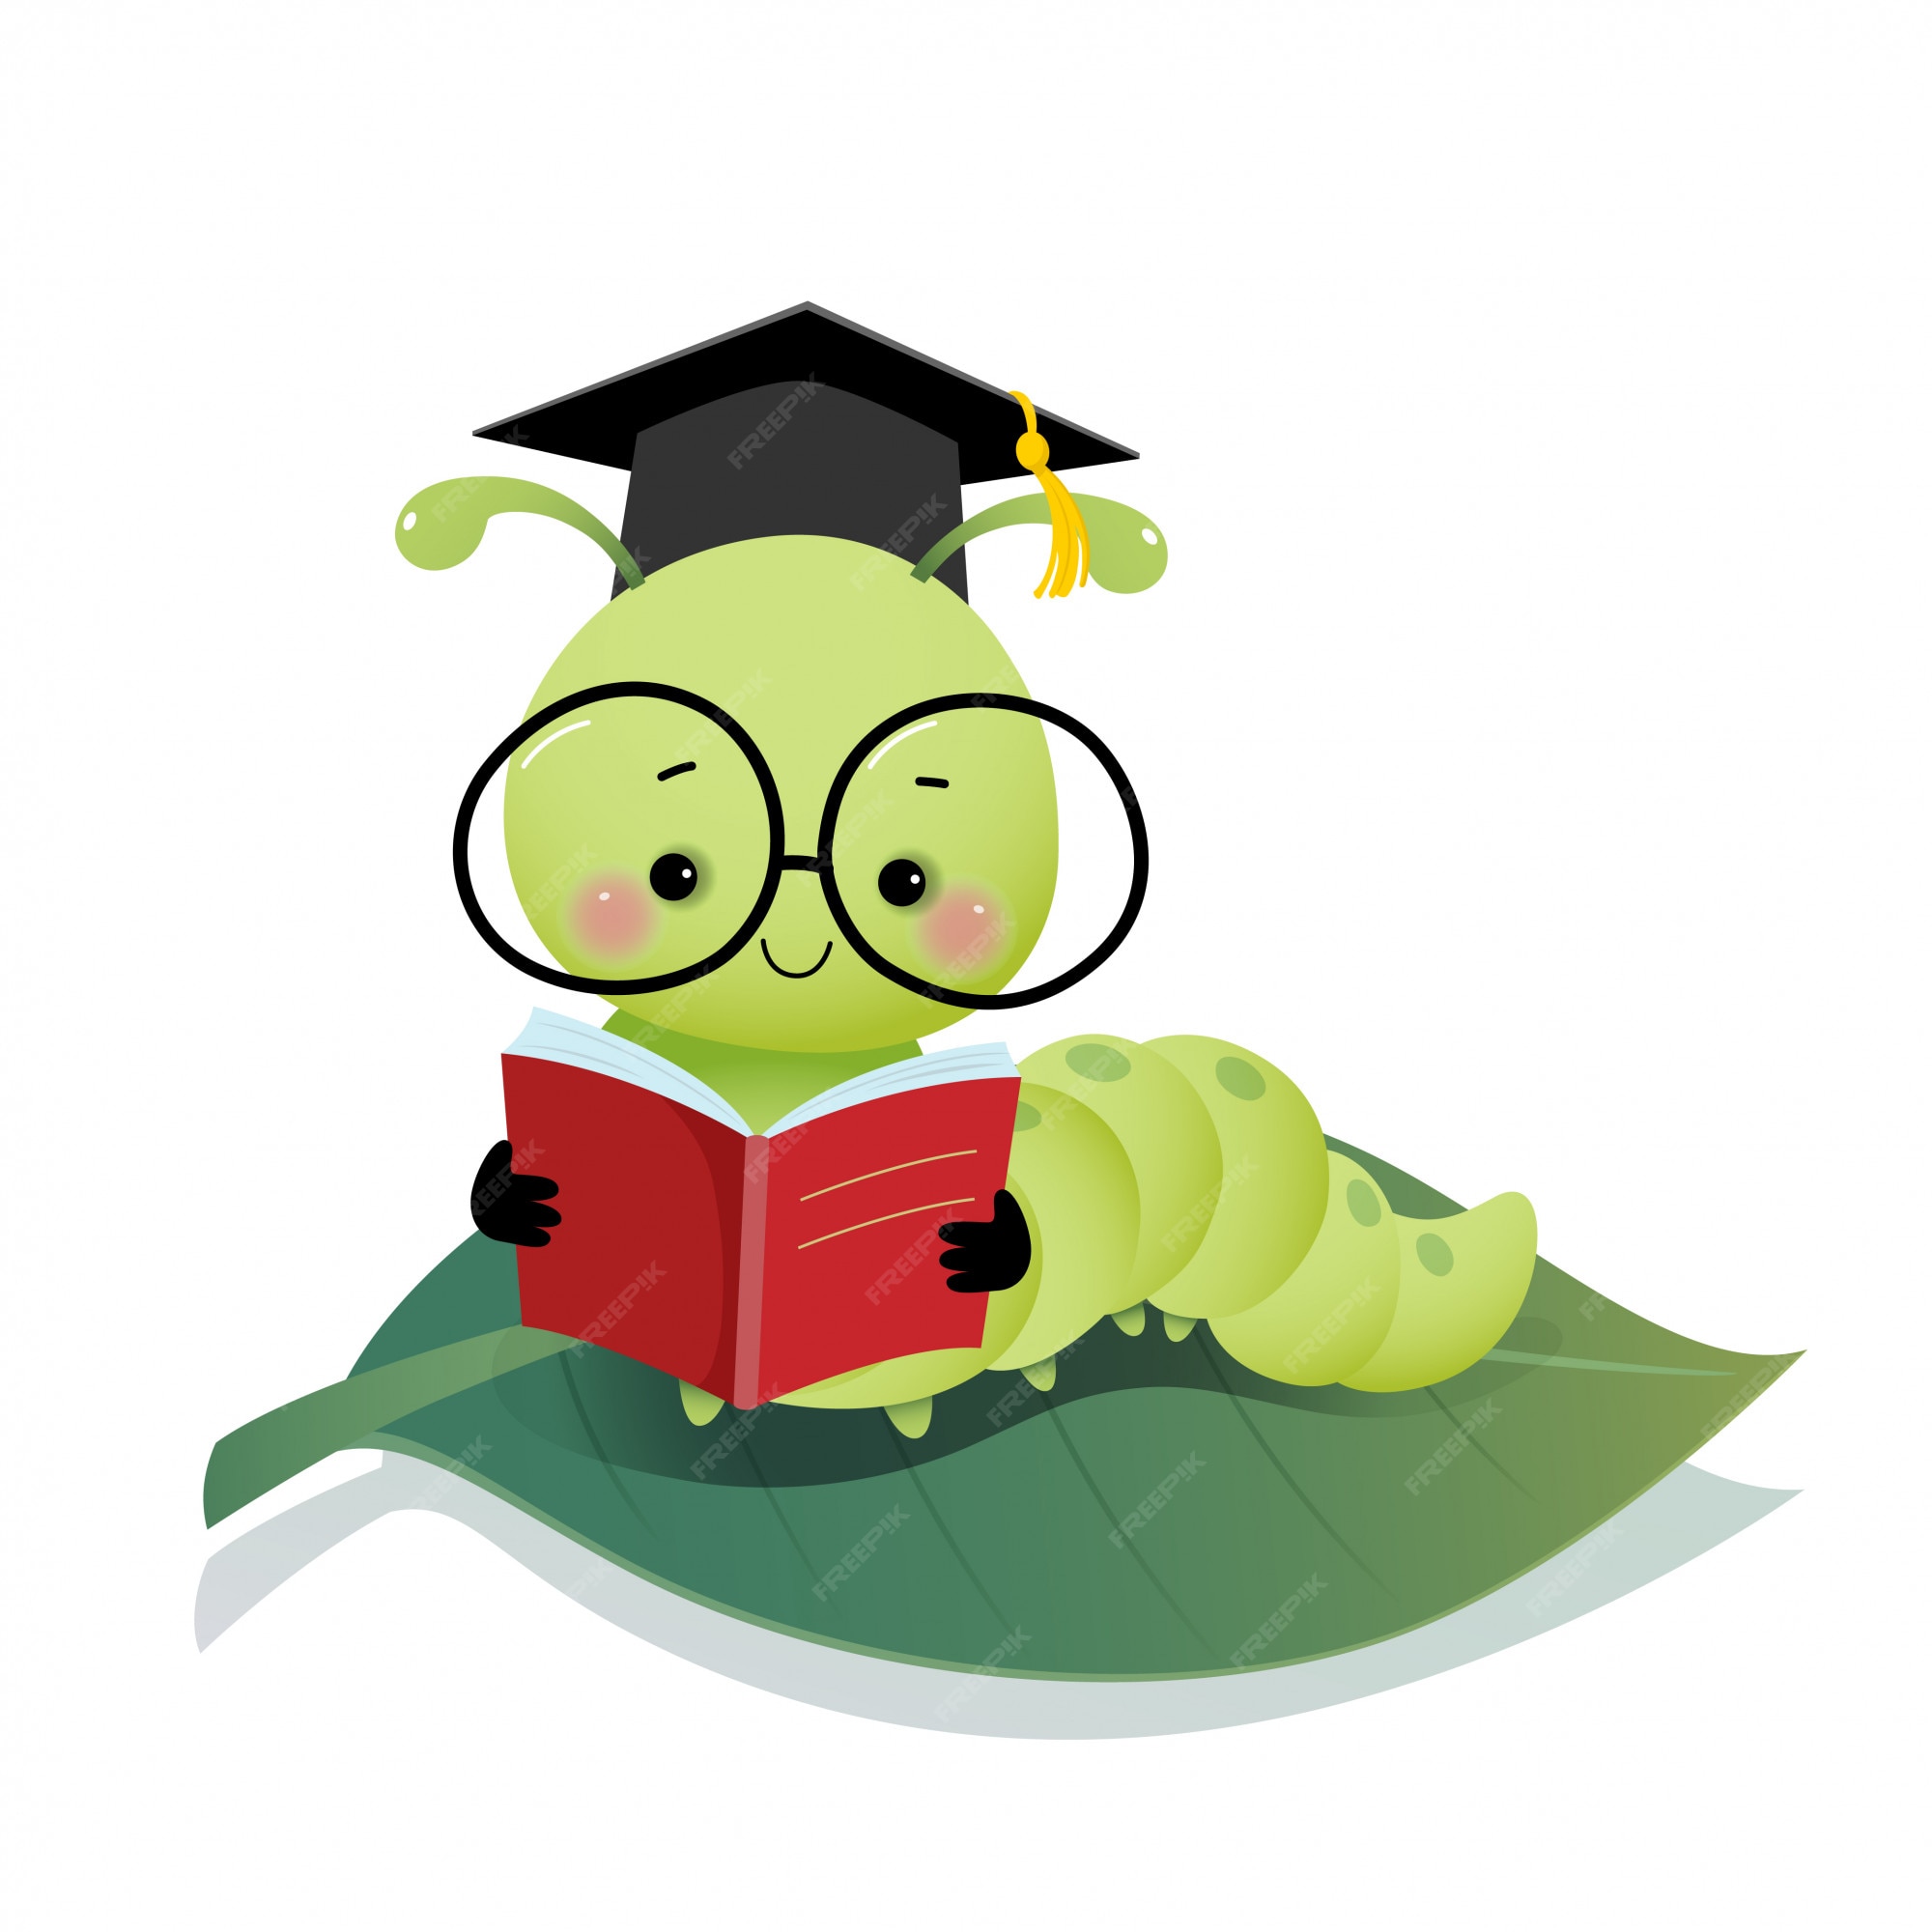 Premium Vector | Vector illustration cute cartoon caterpillar worm wearing  graduation mortarboard hat and glasses reading a book on the leaf.